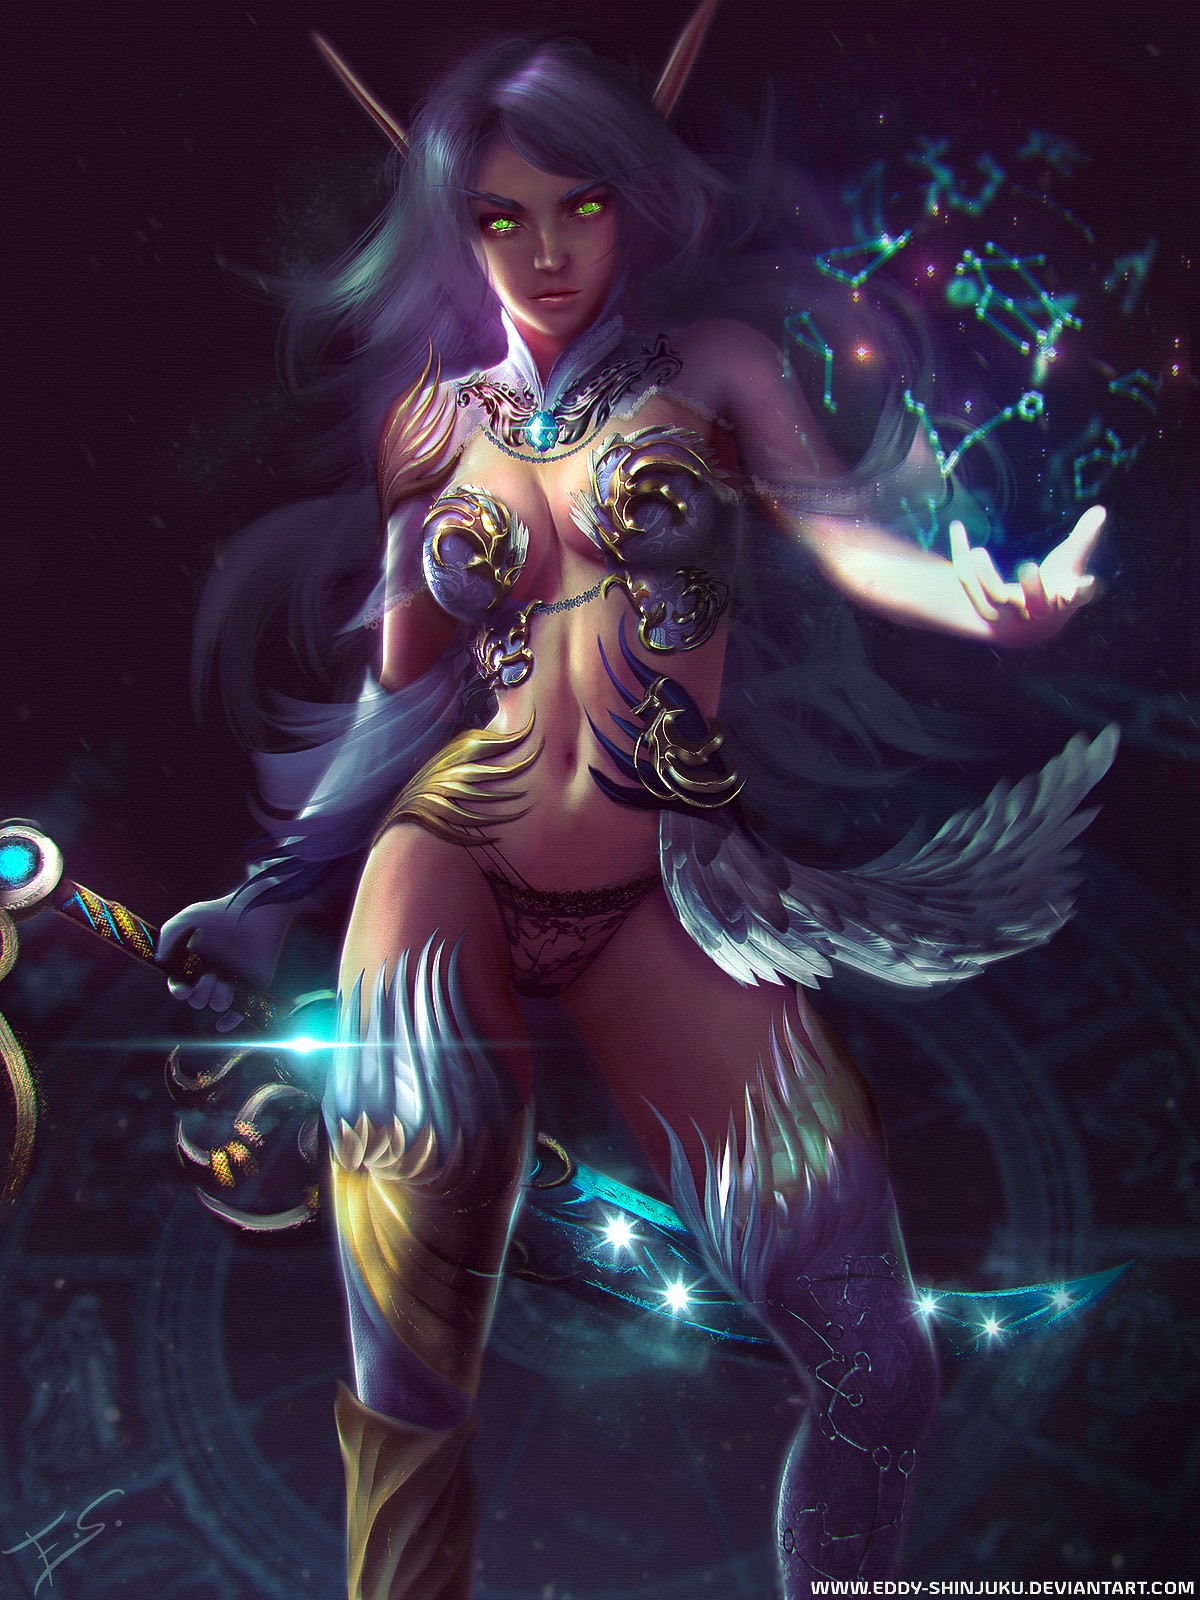 General 1200x1600 anime World of Warcraft blood elves video games video game girls PC gaming boobs belly glowing eyes pointy ears video game art DeviantArt